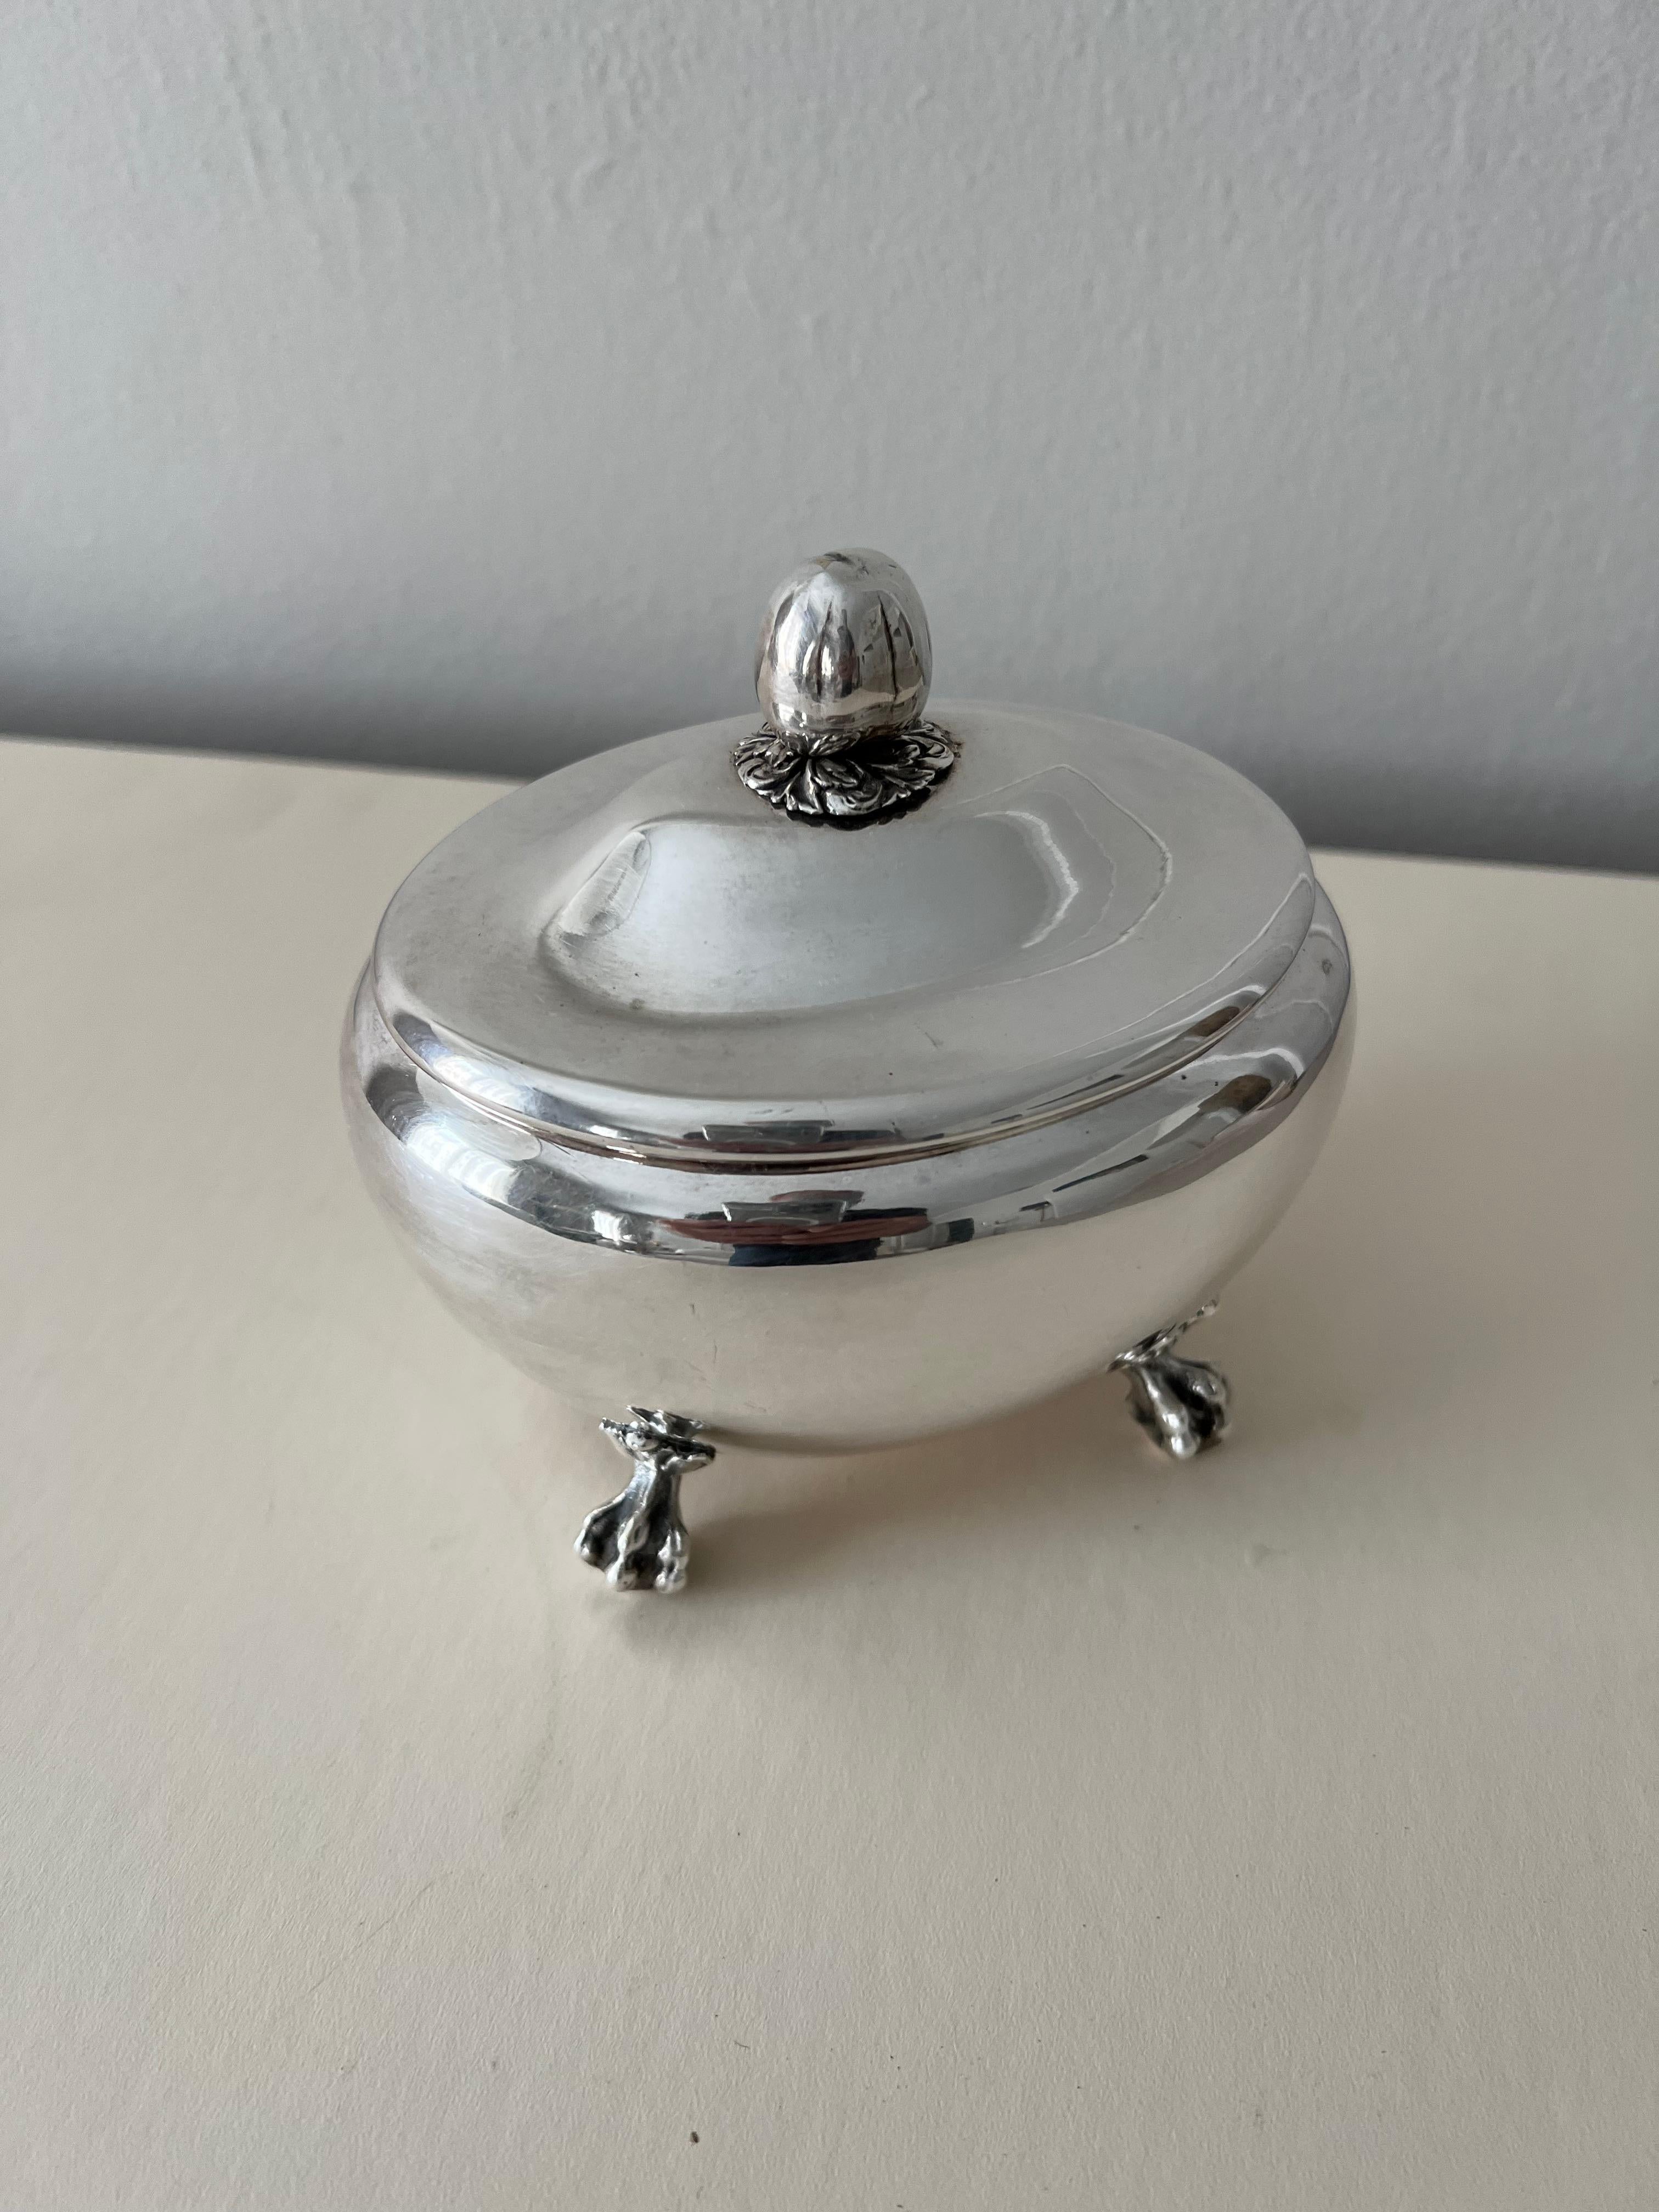 A wonderful oval silver plate box, hinged for storing everything from mementos to 420! A compliment to any cocktail table, desk or nightstand - to hide those things like mints or paper clips and doing it in a very sophisticated way.